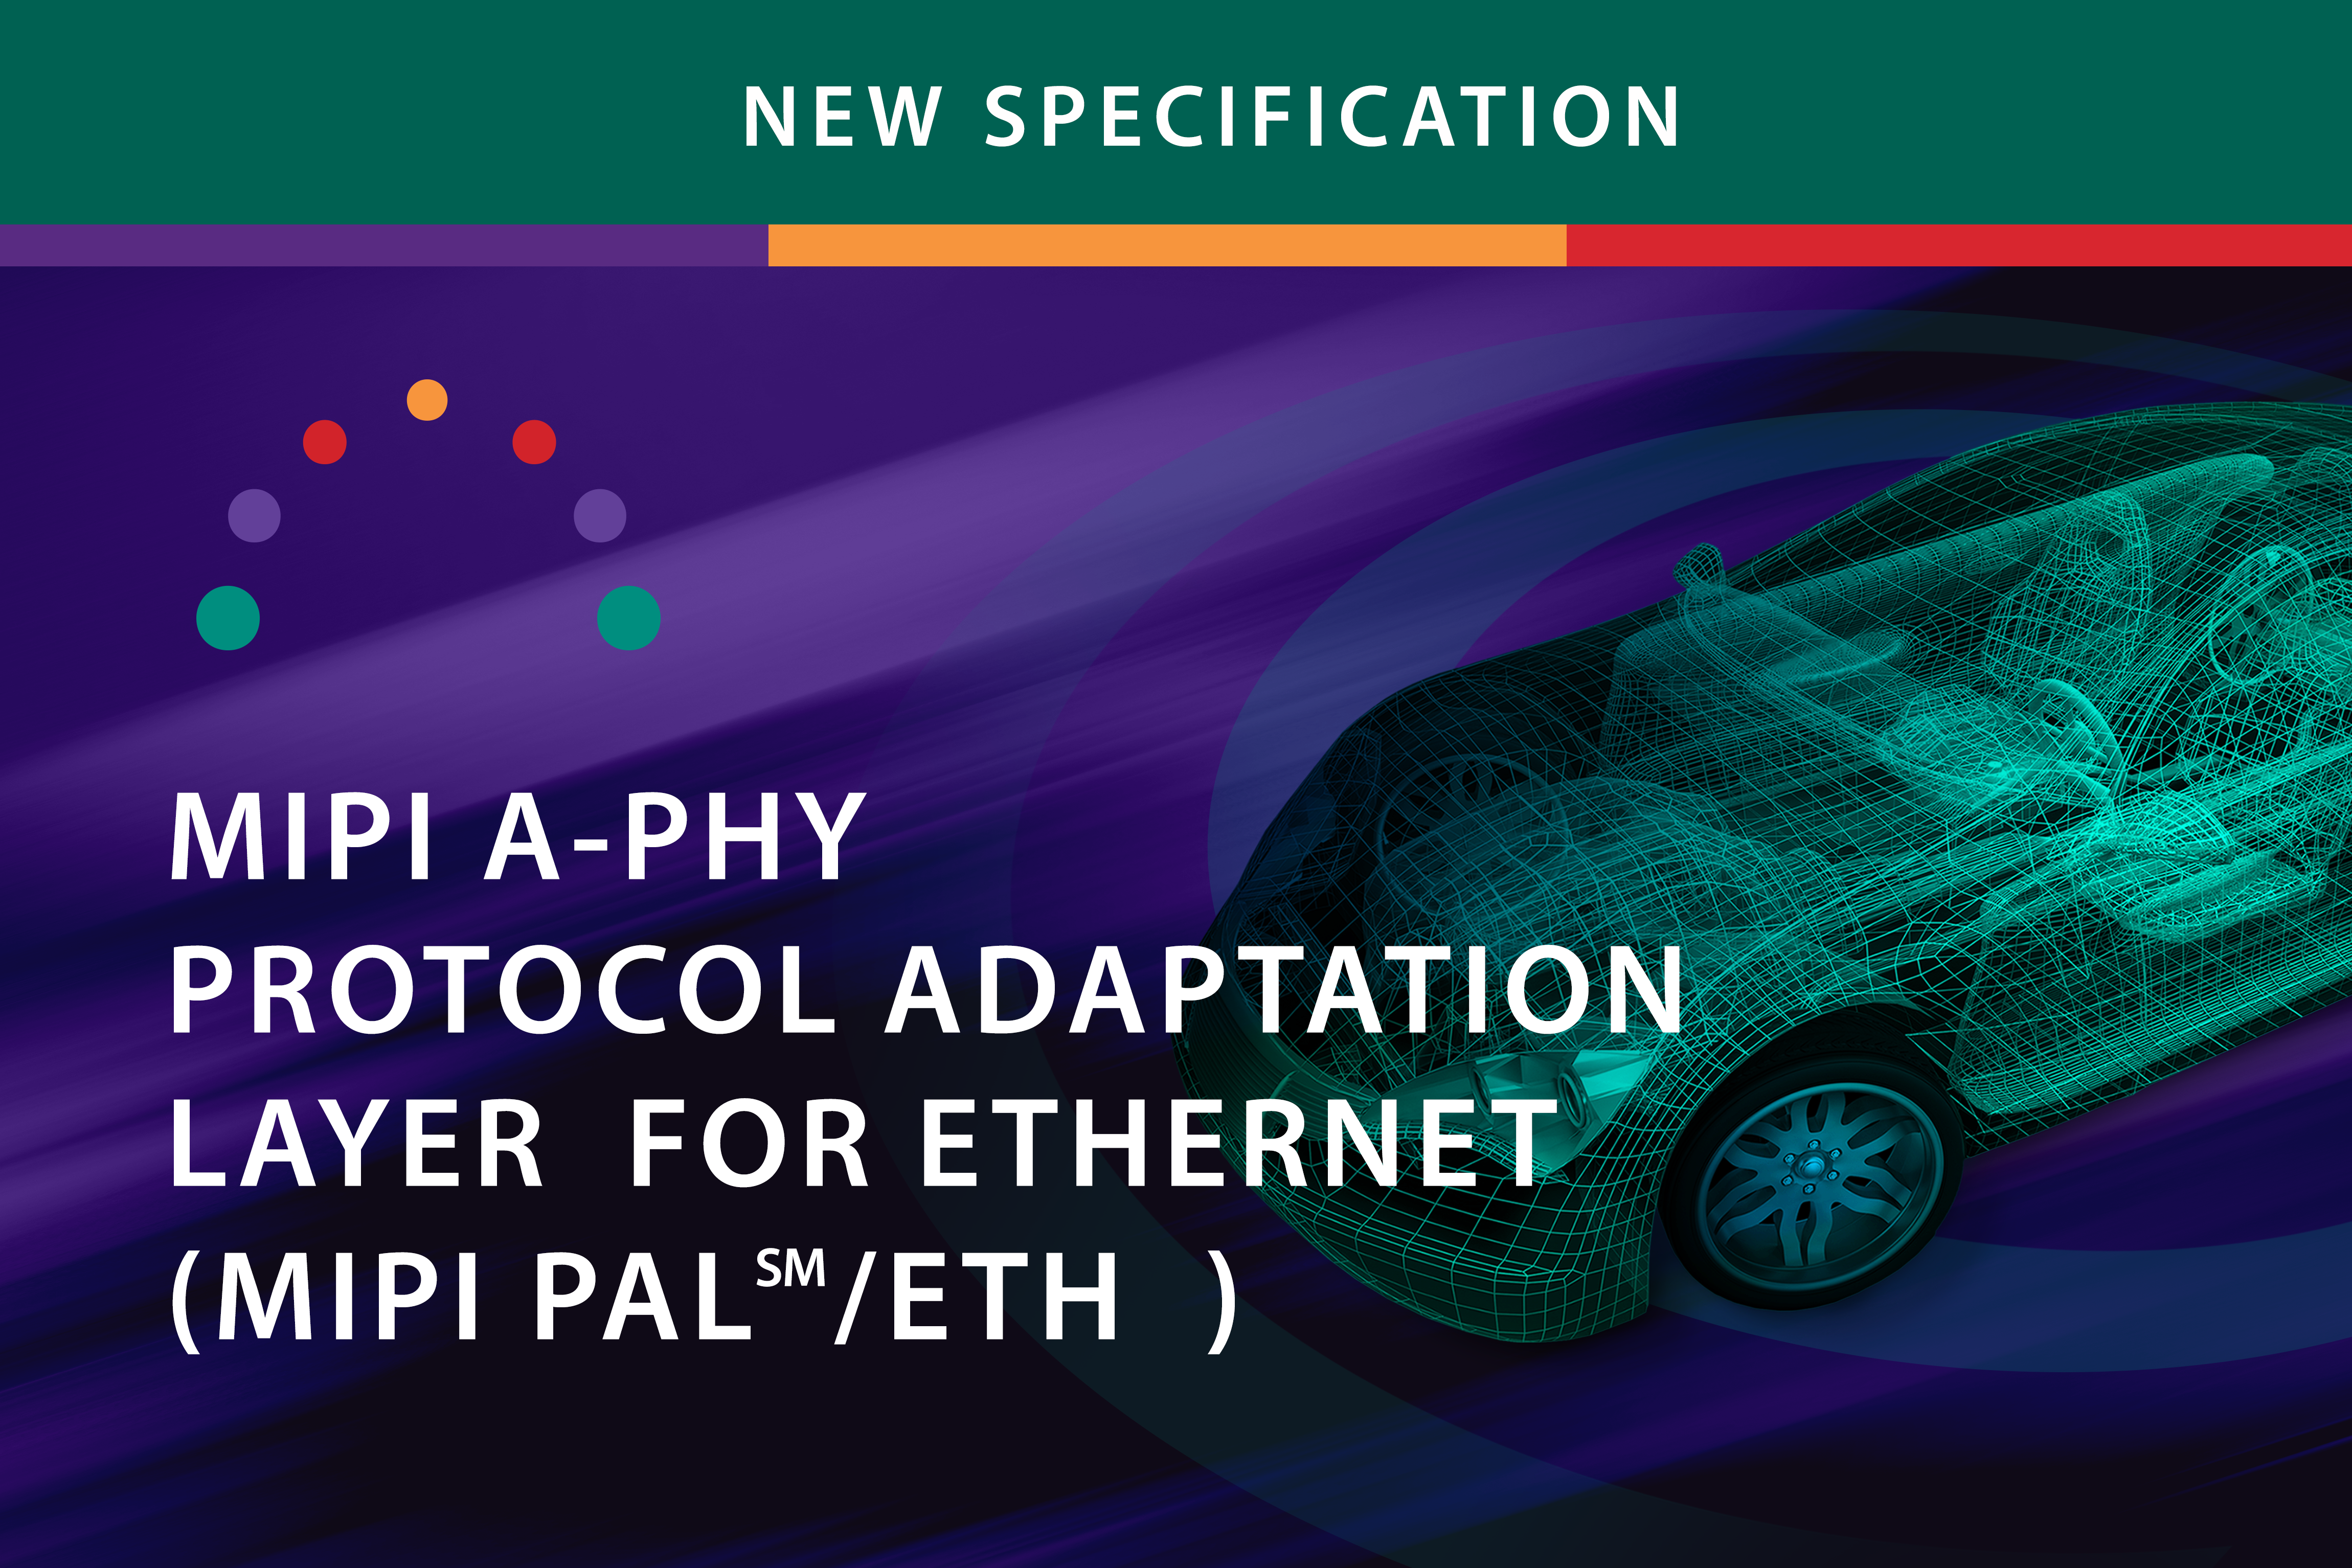 New Specification: MIPI PAL/ETH